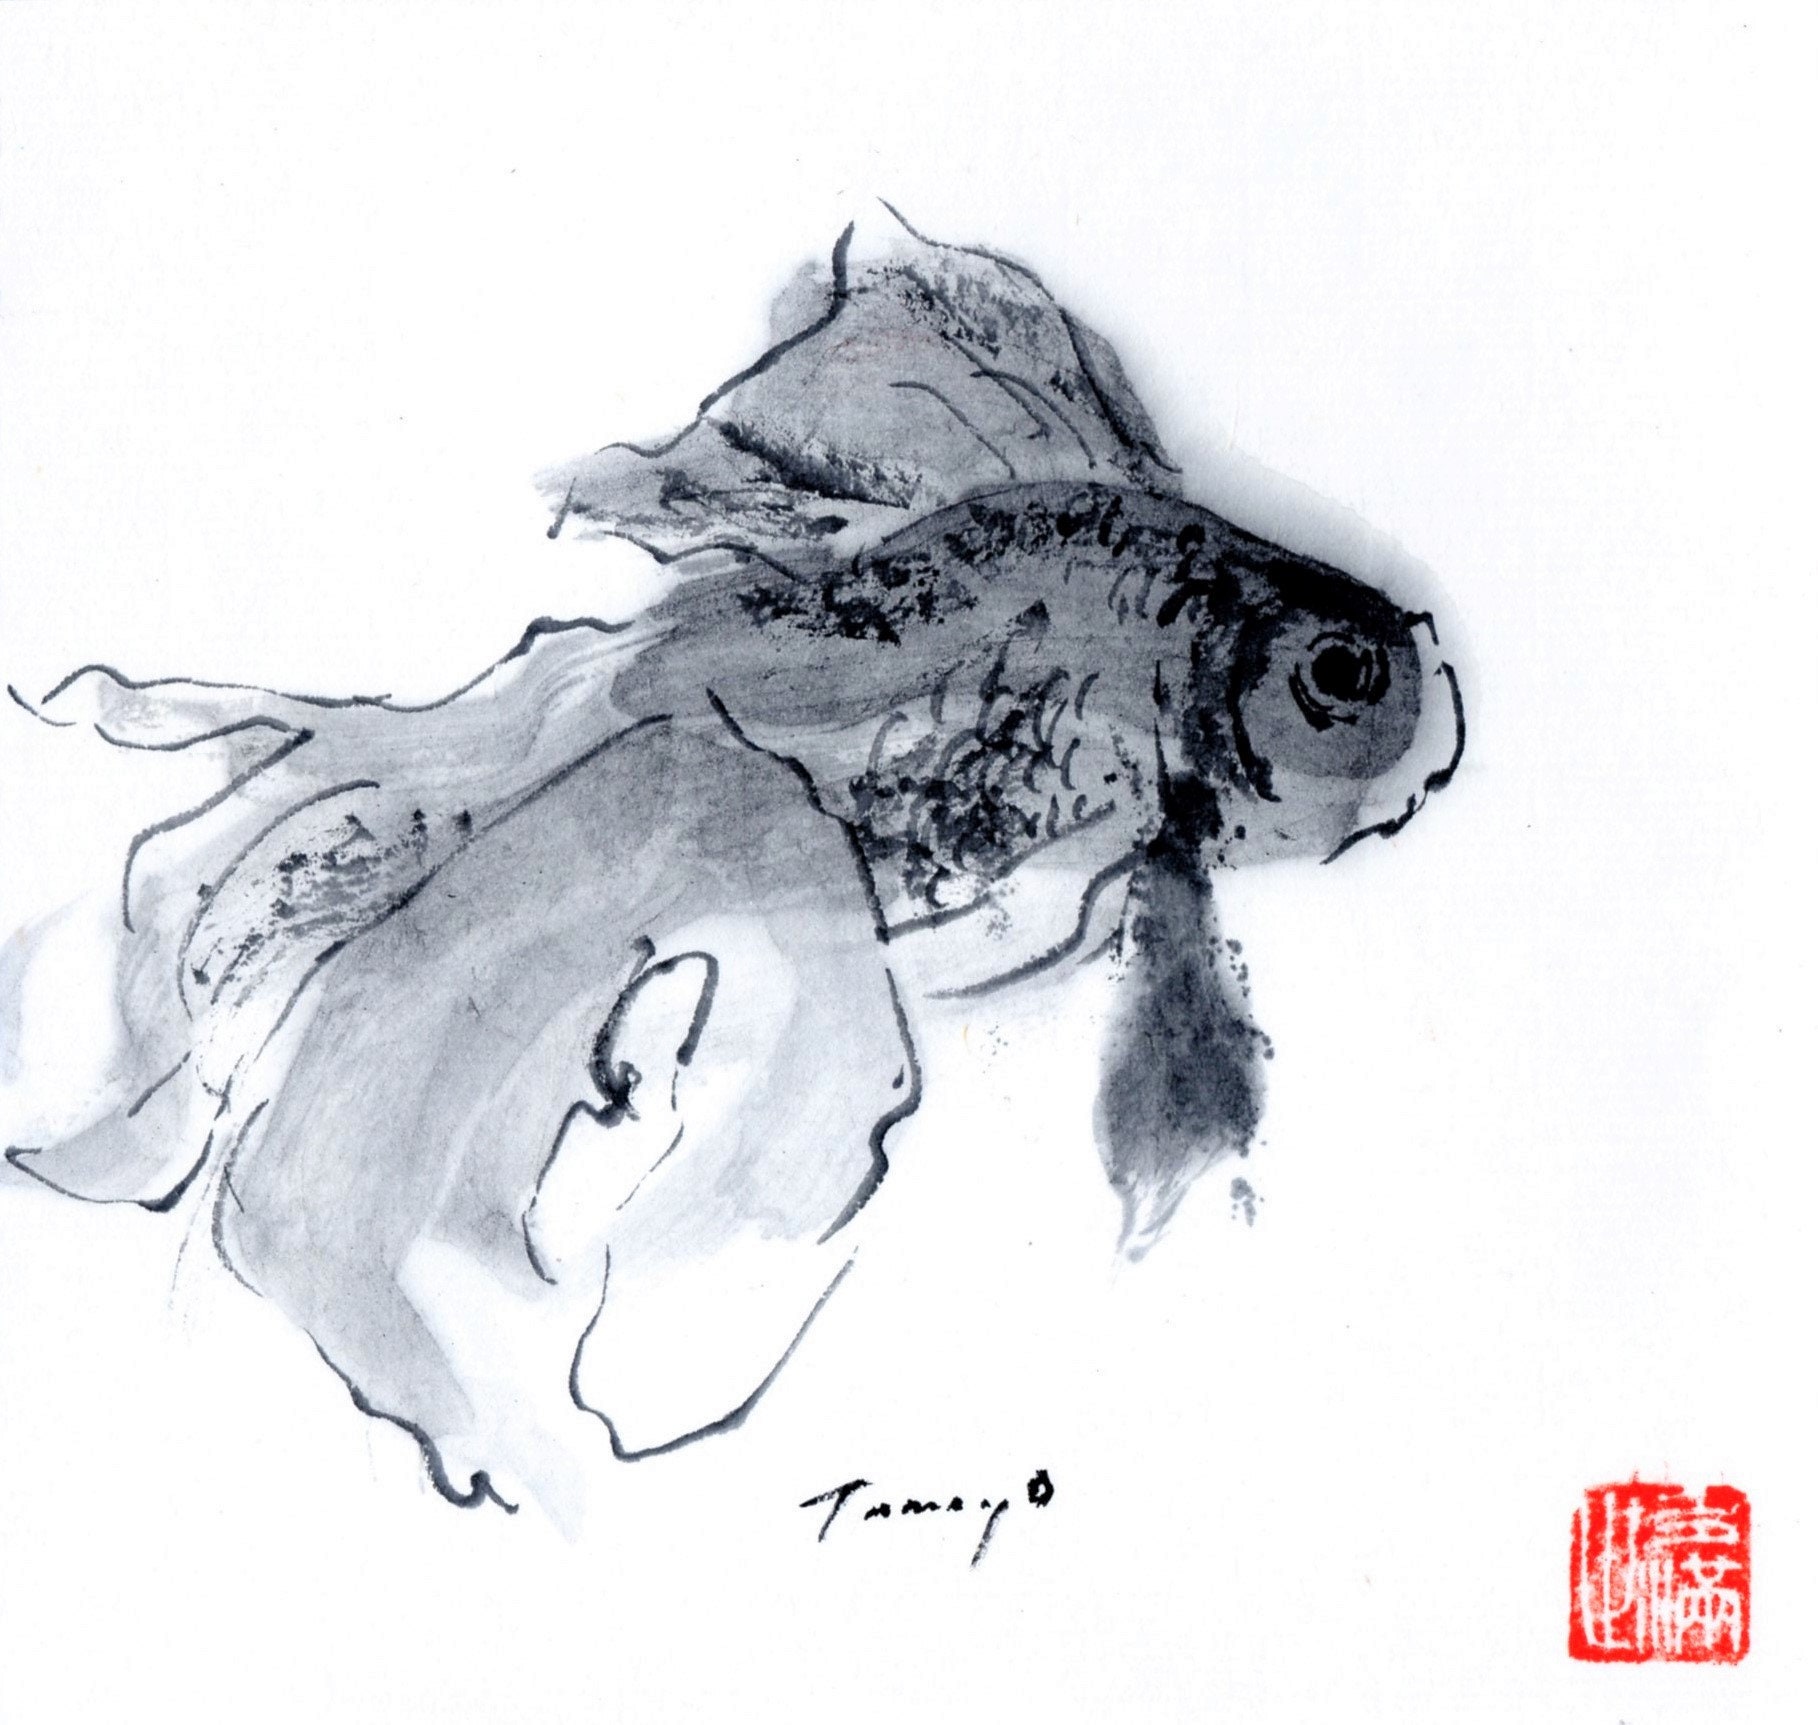 Original Pen & Ink fish drawing sketch of a goldfish on ivory